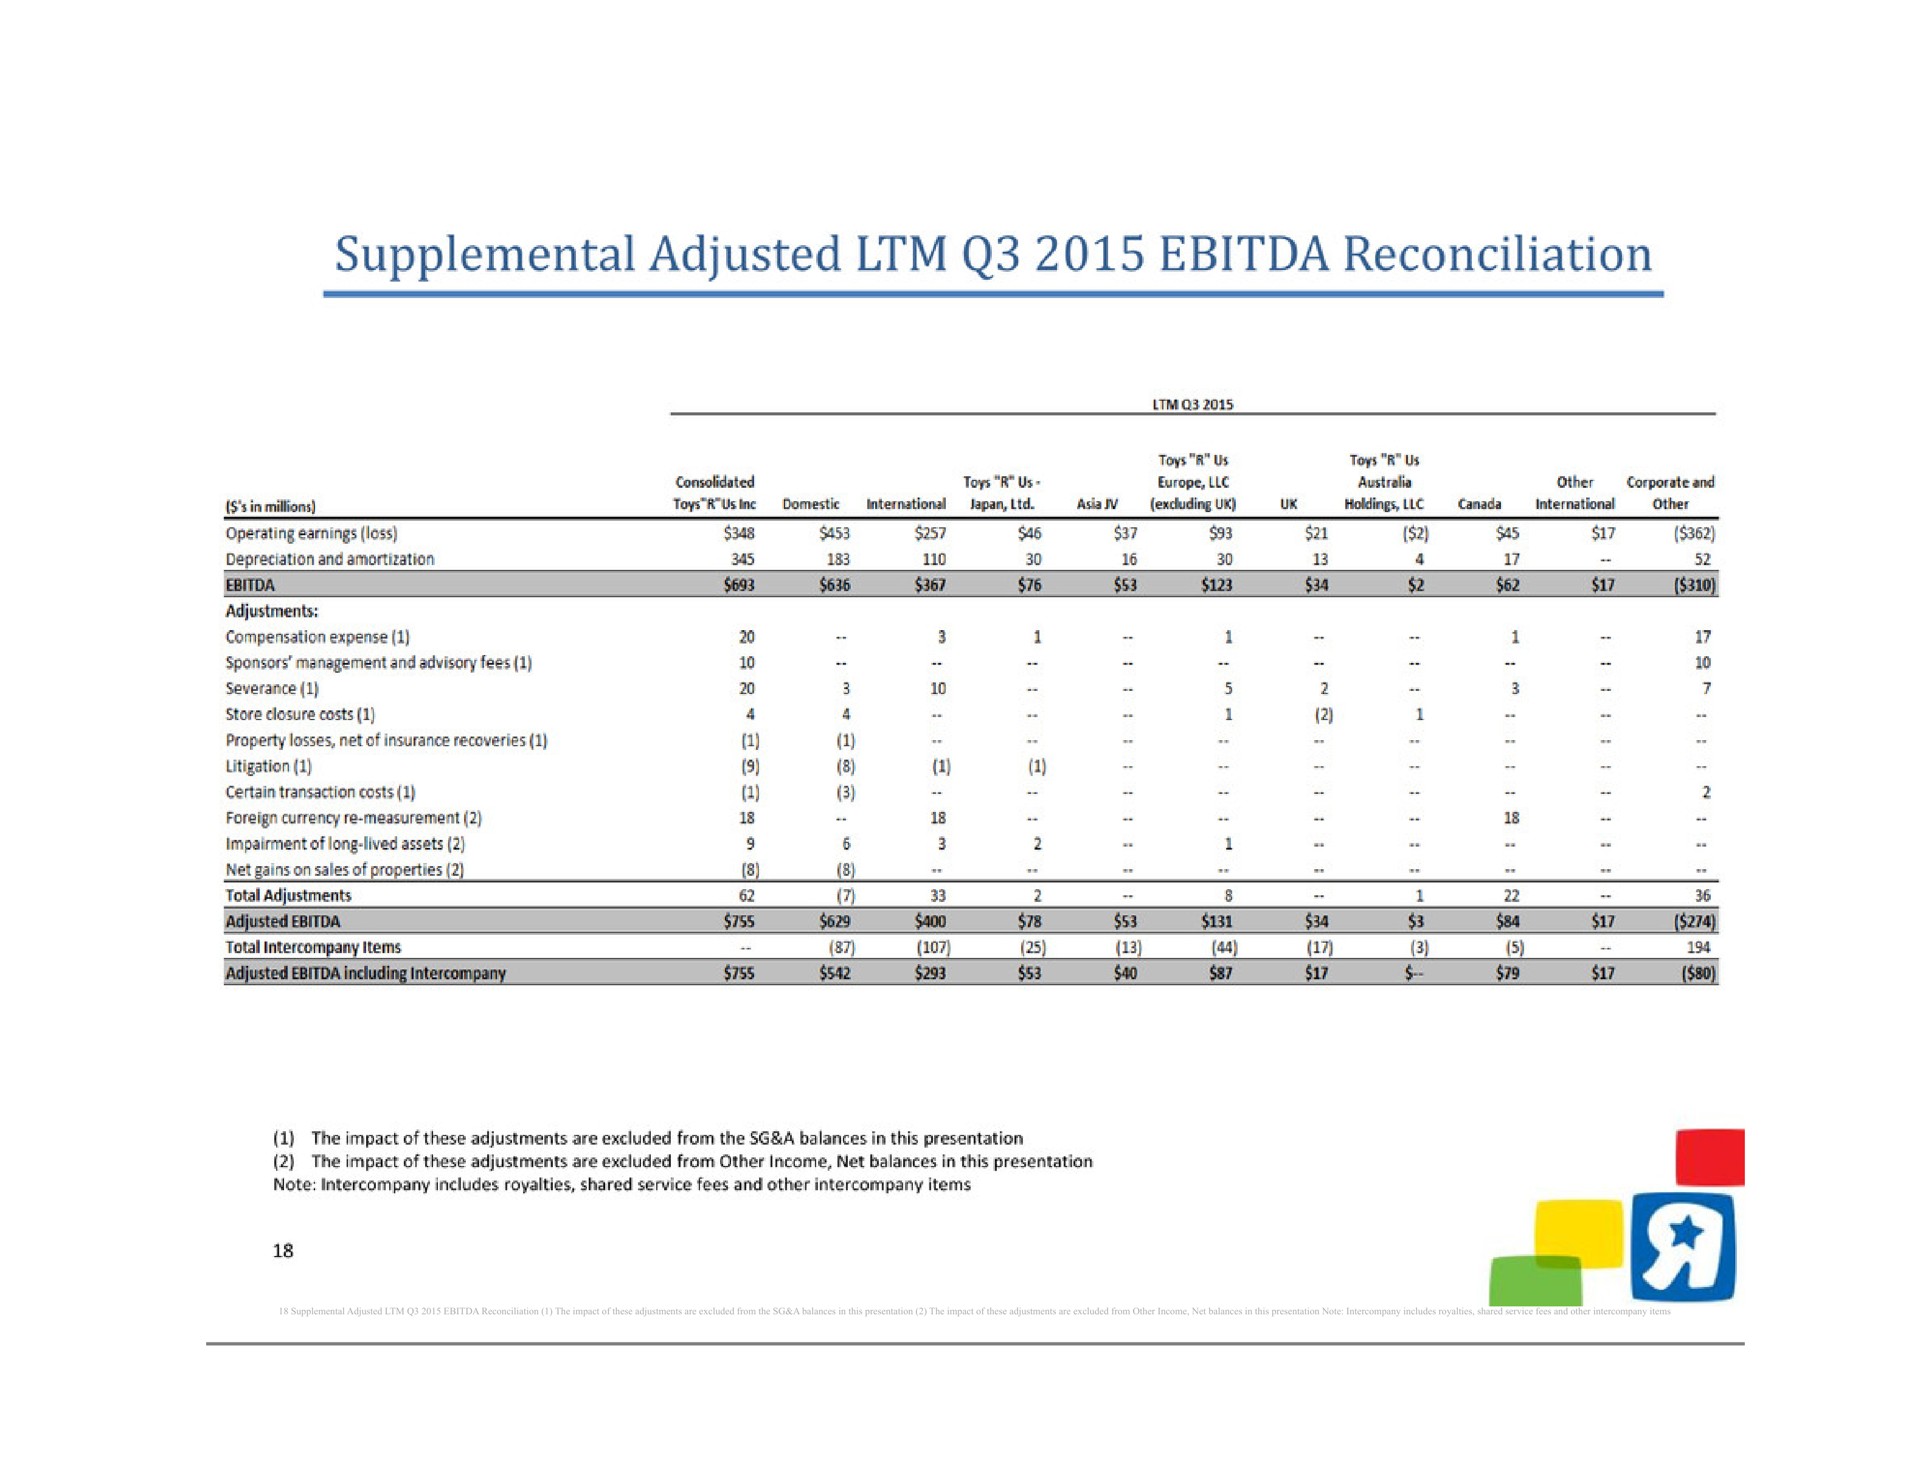 supplemental adjusted reconciliation the impact of these adjustments are excluded from the a balances in this presentation the impact of these adjustments are excluded from other income net balances in this presentation note intercompany includes royalties shared service fees and other intercompany items | Toys R Us